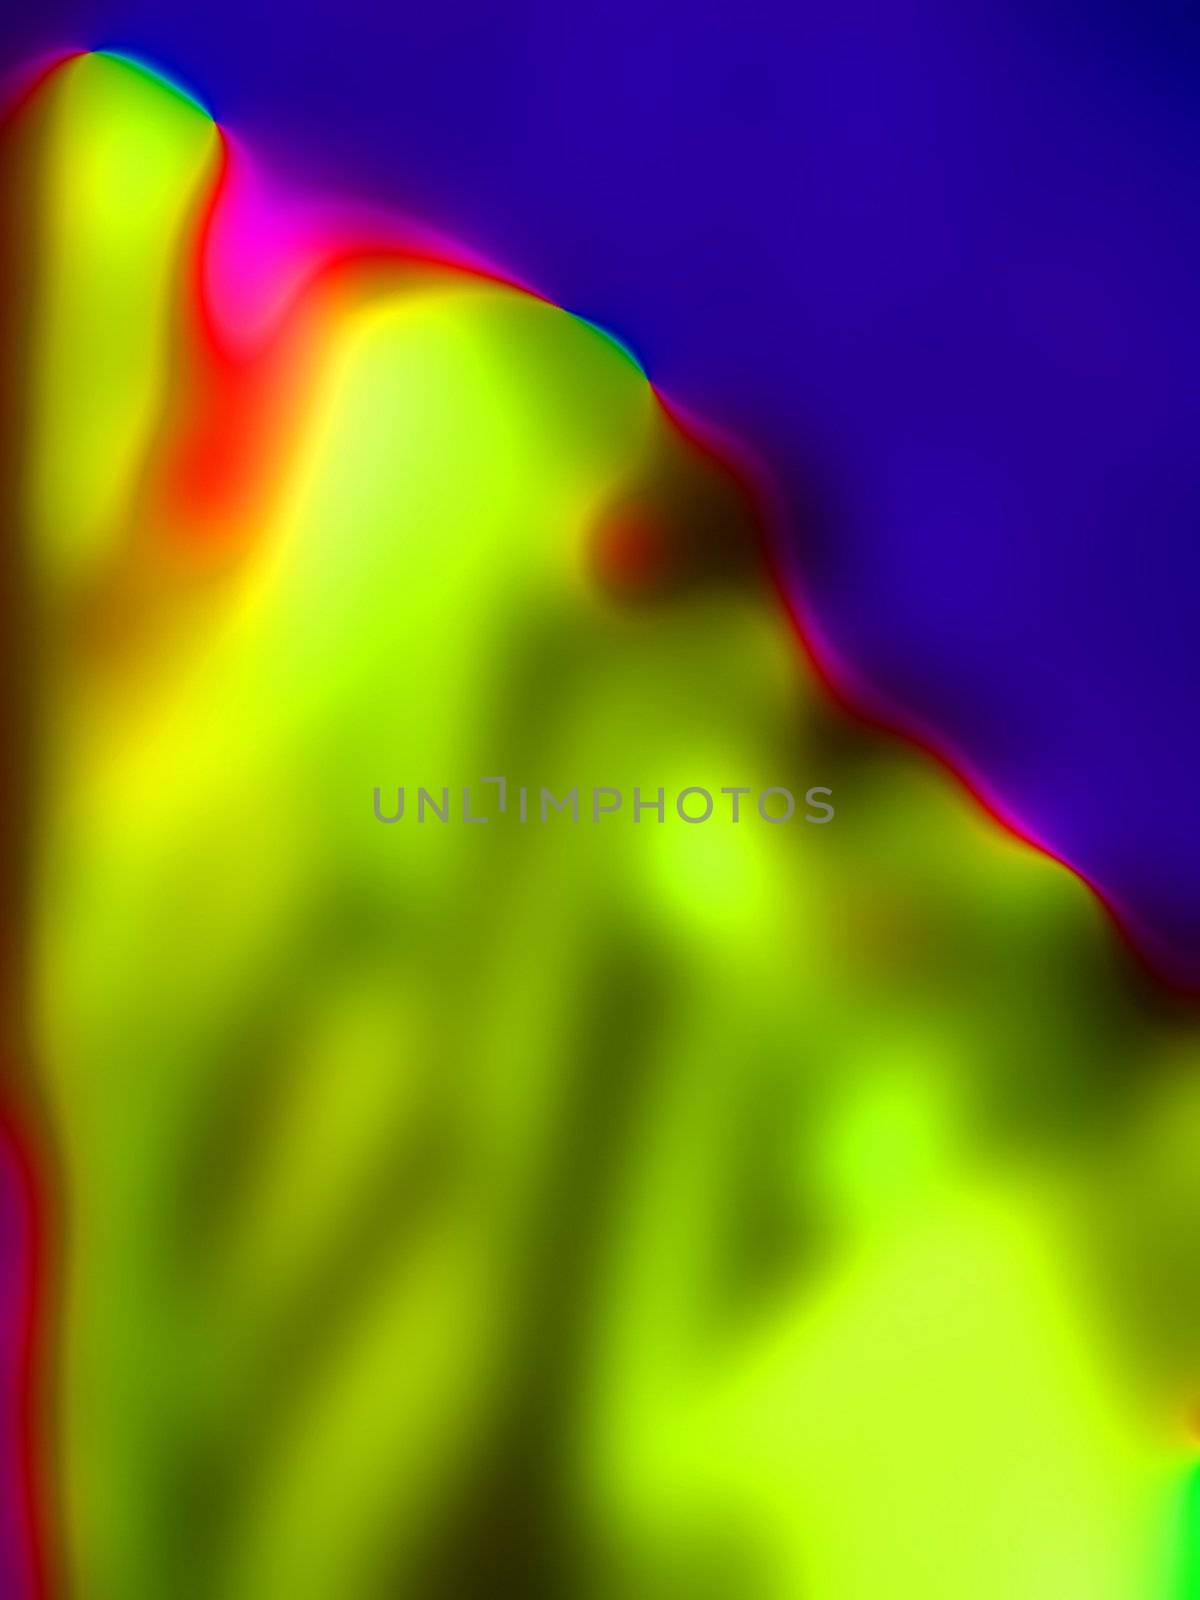 Multicoloured background resembling the melting fluid in a lava lamp. Suitable for scrapbooking, web design and other projects